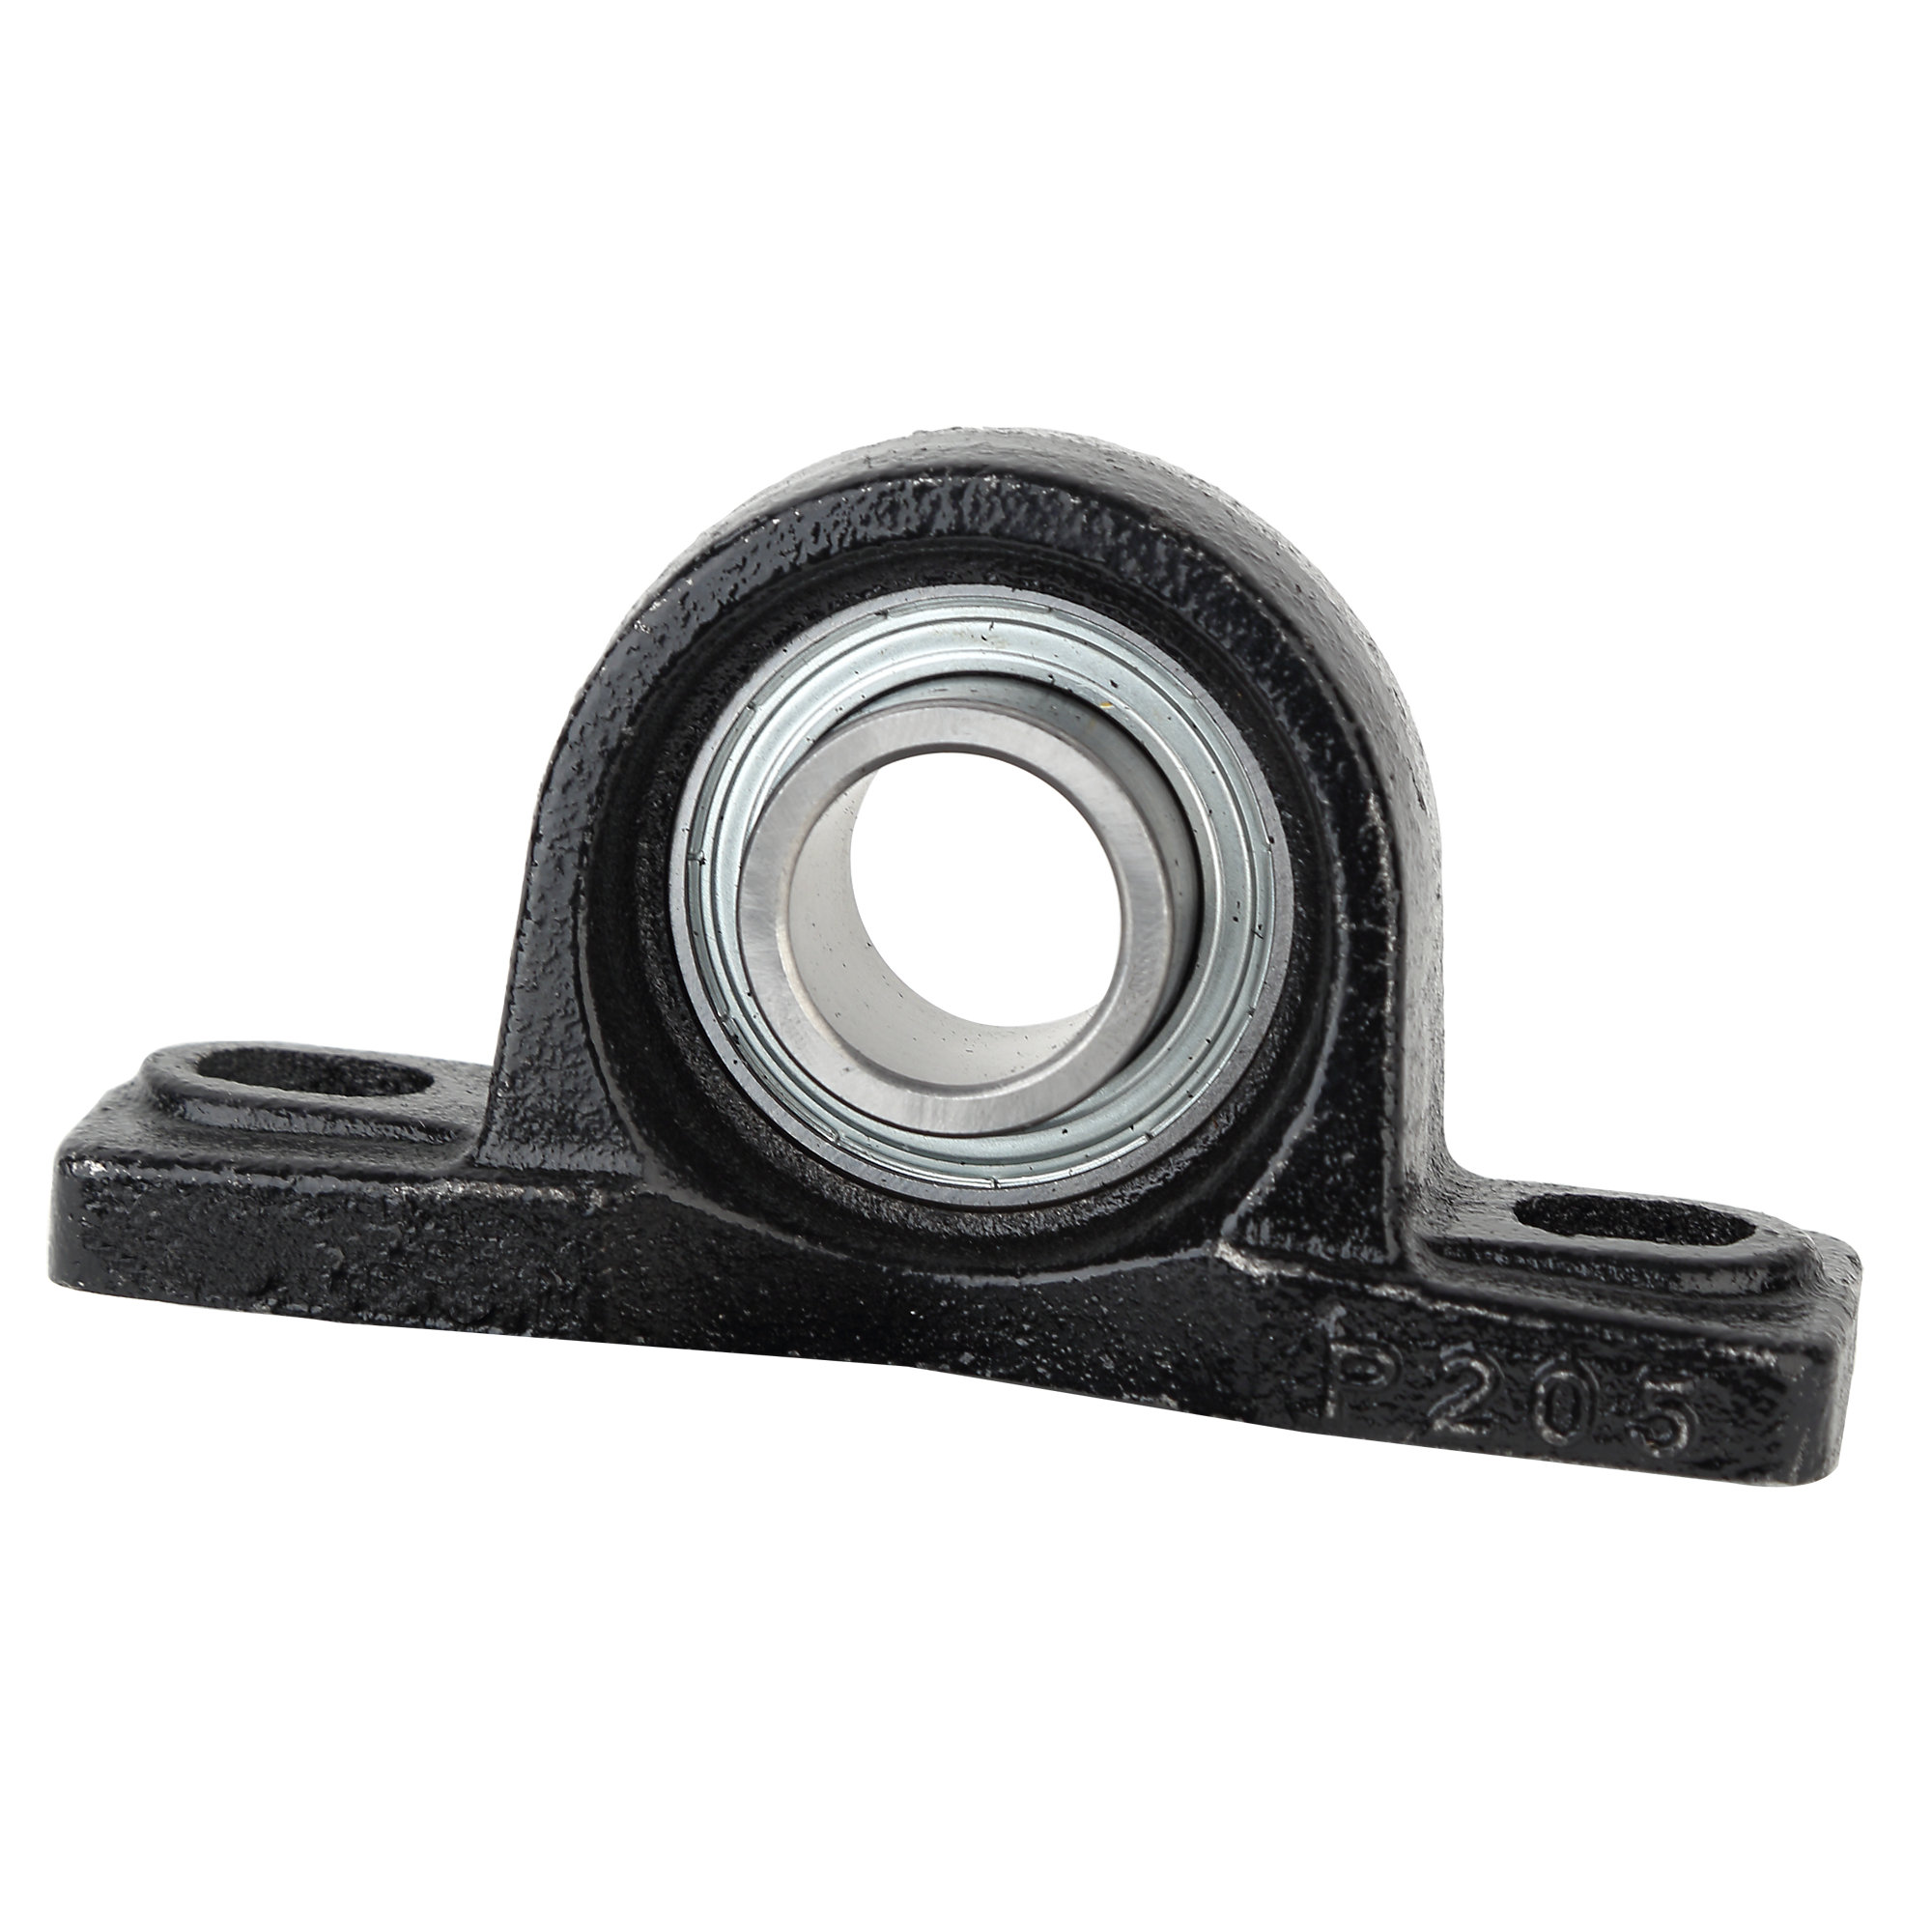 Pillow Block Bearing for Single Pulley, Press Fit, Cybex